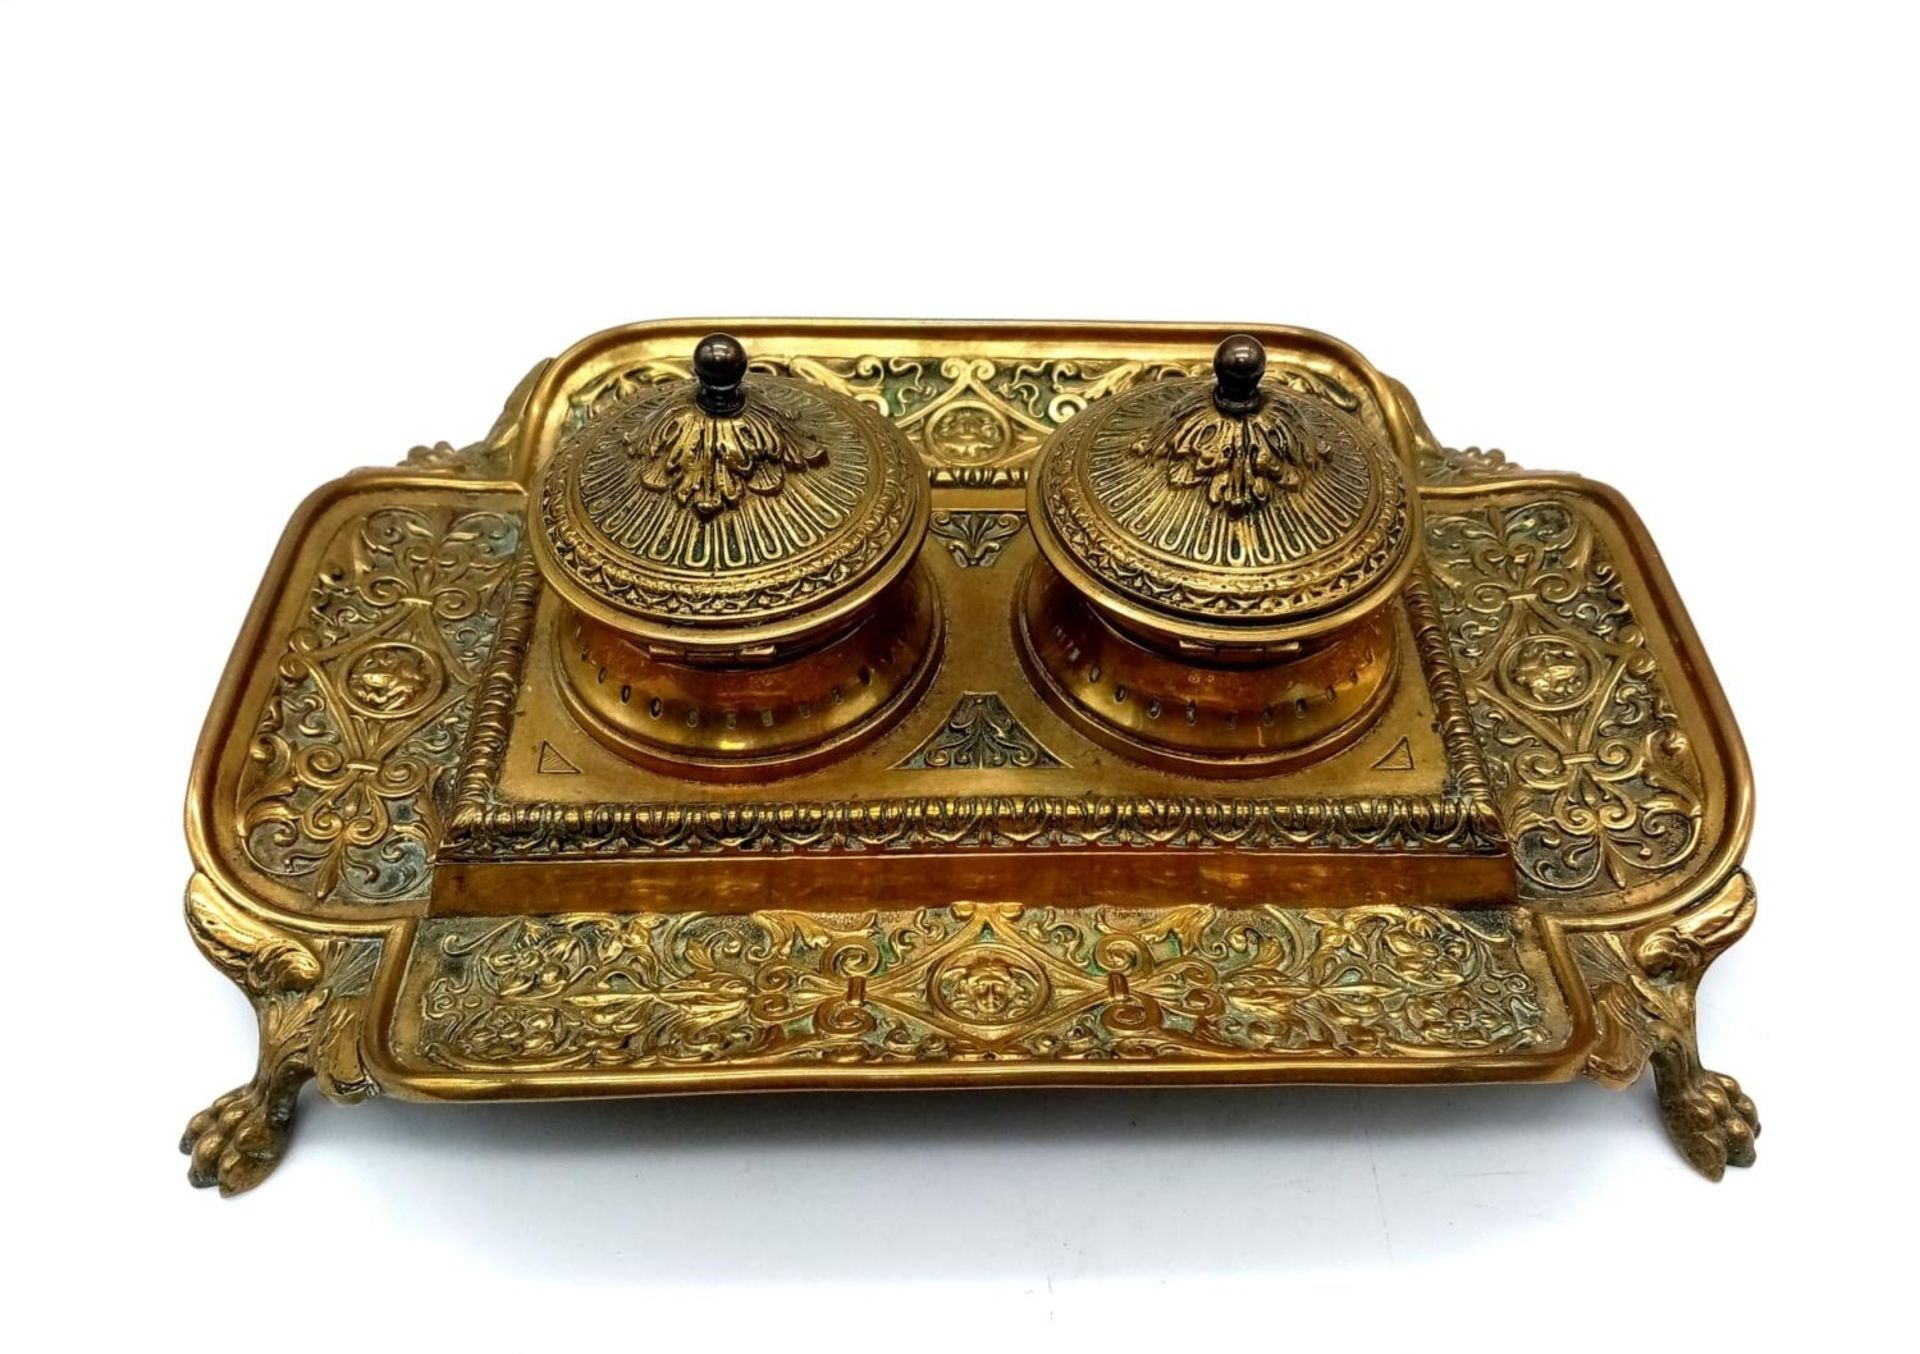 An Antique Brass (Possibly French) Double Inkwell. Ornate regal scroll decoration throughout with